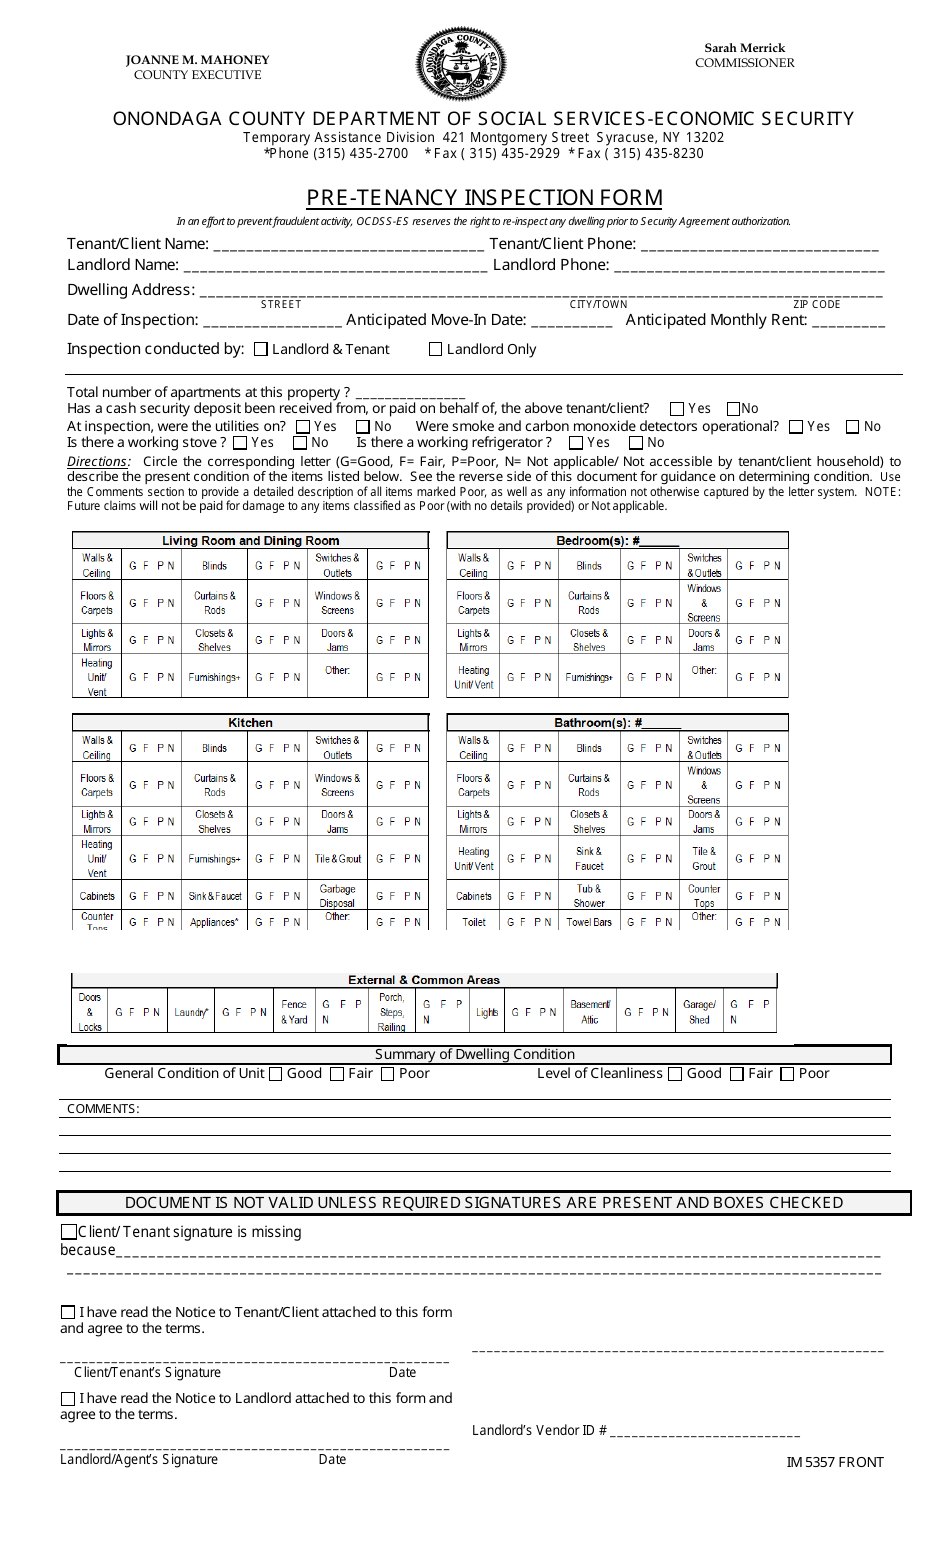 Form IM5357 Attachment 5 Pre-tenancy Inspection Form - Onondaga County, New York, Page 1